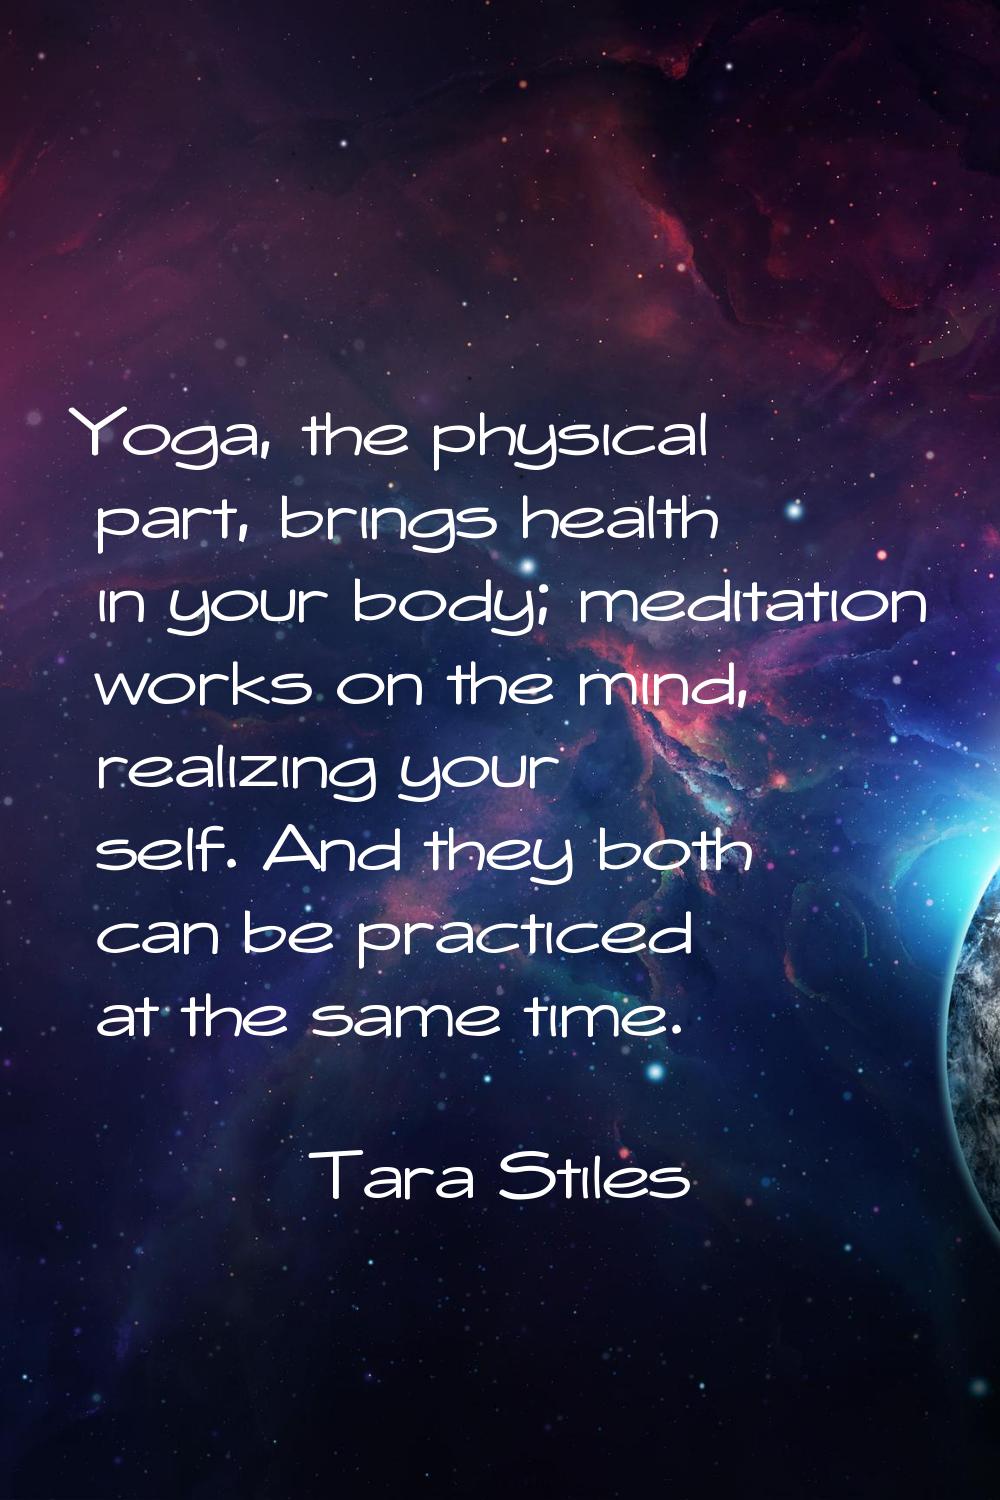 Yoga, the physical part, brings health in your body; meditation works on the mind, realizing your s